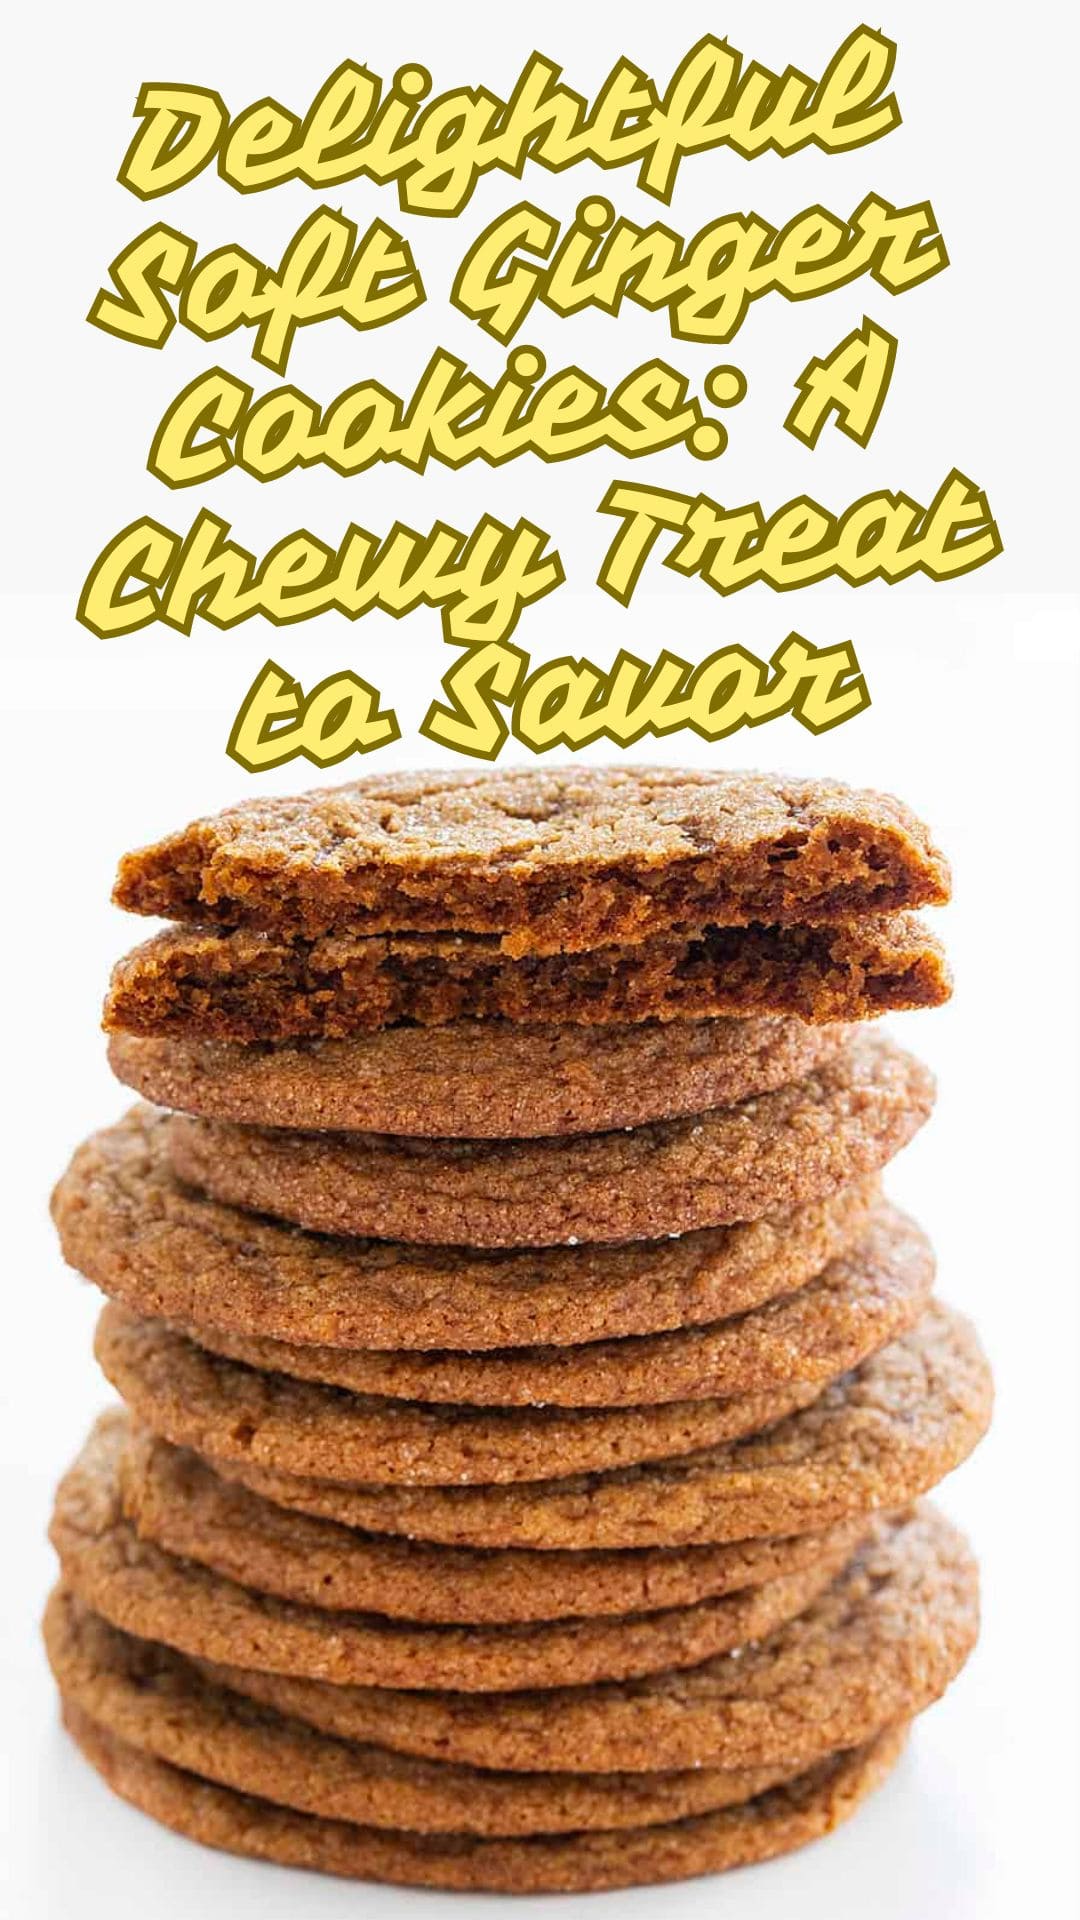 Delightful Soft Ginger Cookies: A Chewy Treat to Savor